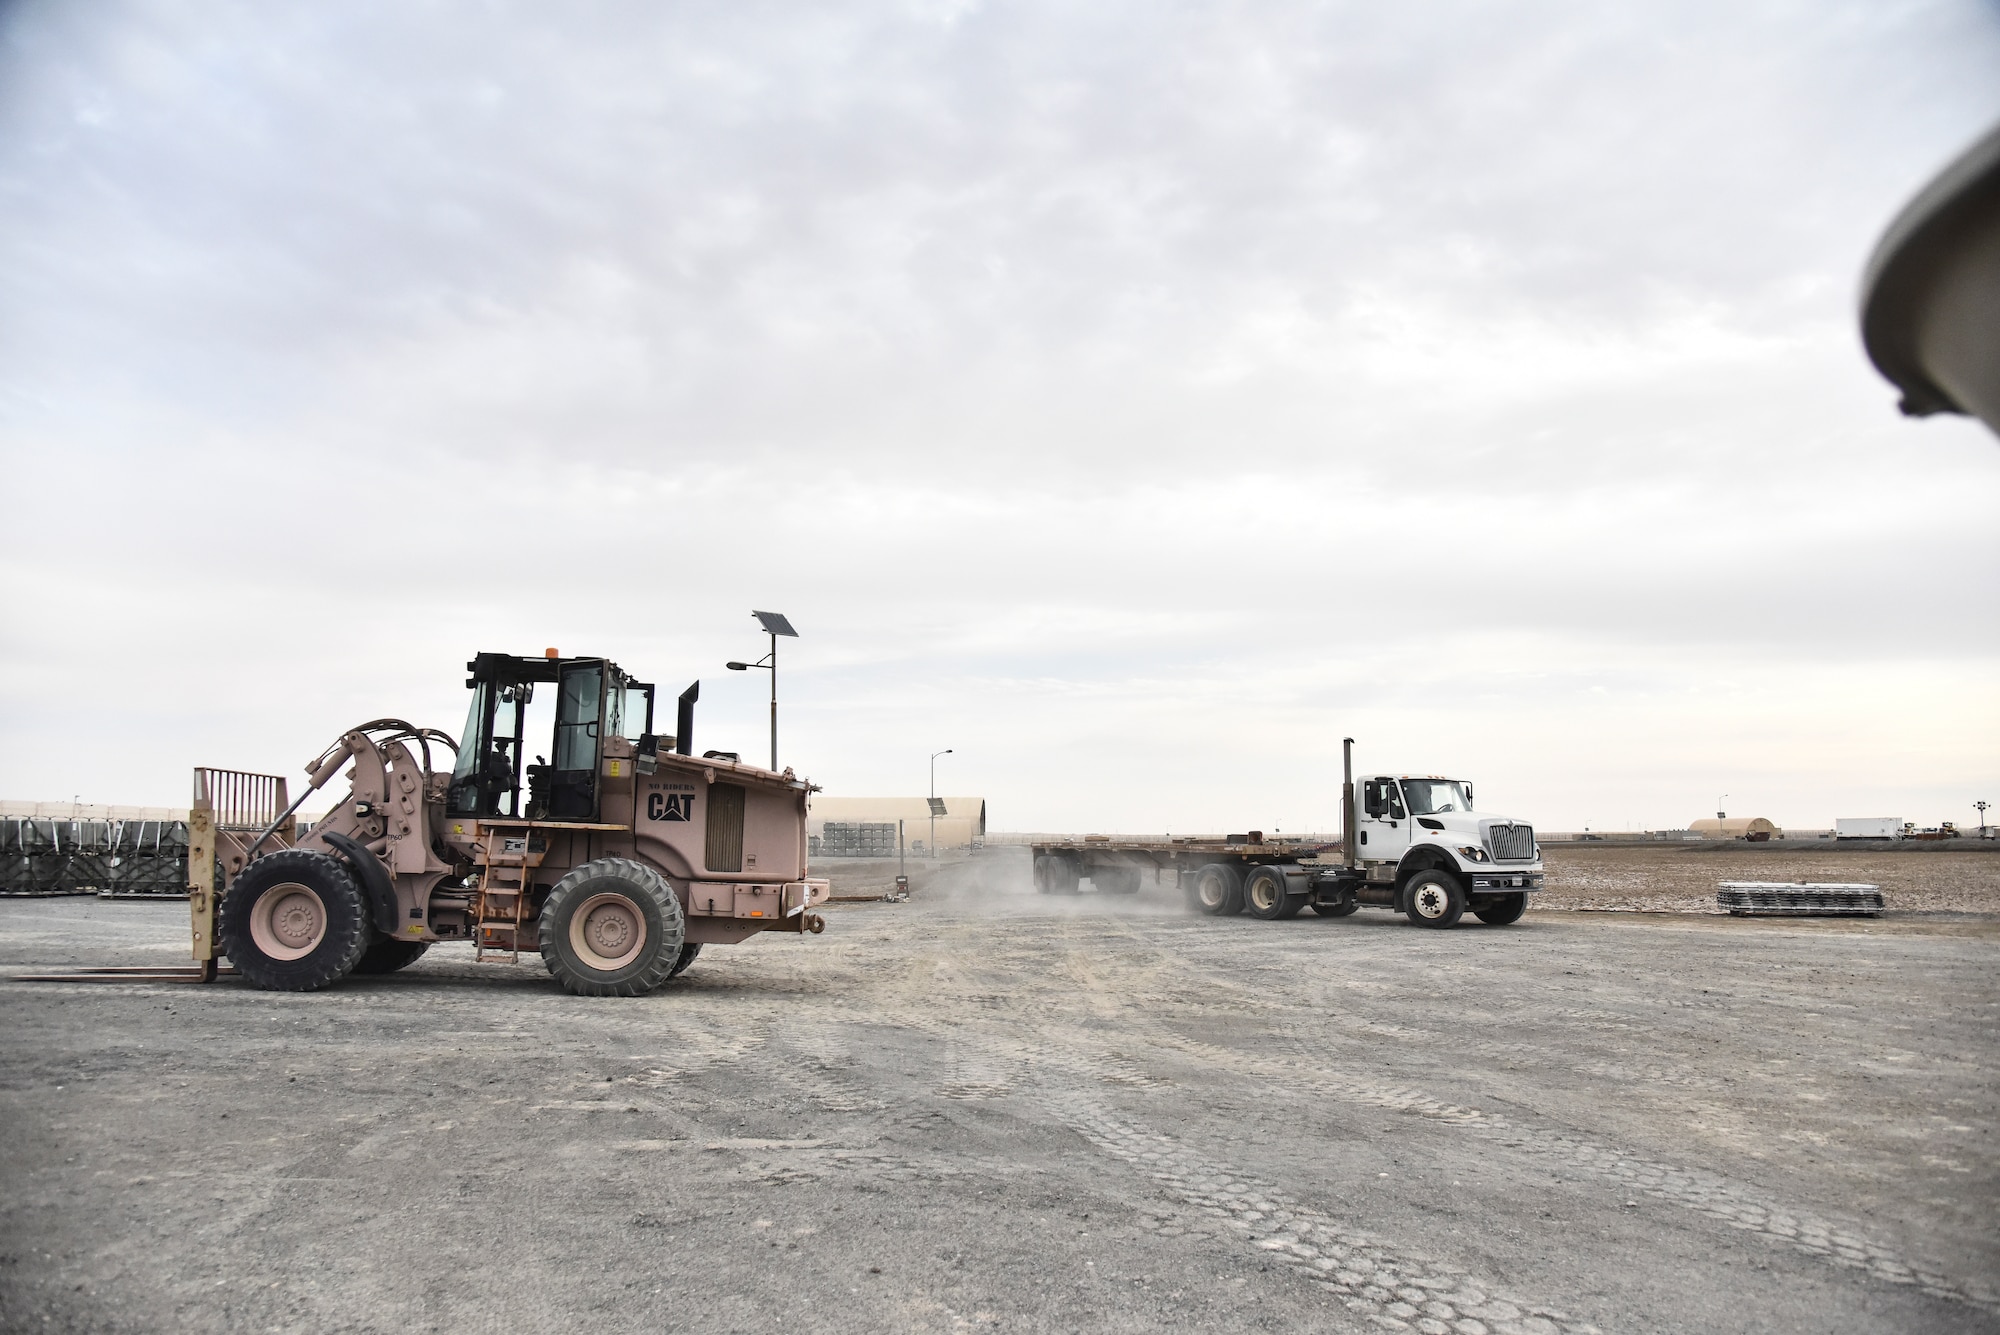 Airmen assigned to the 380th Expeditionary Maintenance Squadron munitions flight prepare to load guiding sections with a 10k forklift at Al Dhafra Air Base, United Arab Emirates, Feb. 15, 2019. Munitions systems specialists perform and manage munitions production and material tasks and activities; identify munitions and equipment requirements; operate and maintain automated data processing equipment (ADPE) to perform munitions accounting, computations, and research; stores, maintains, assembles, issues, and delivers assembled nonnuclear munitions. (U.S. Air Force photo by Senior Airman Mya M. Crosby)